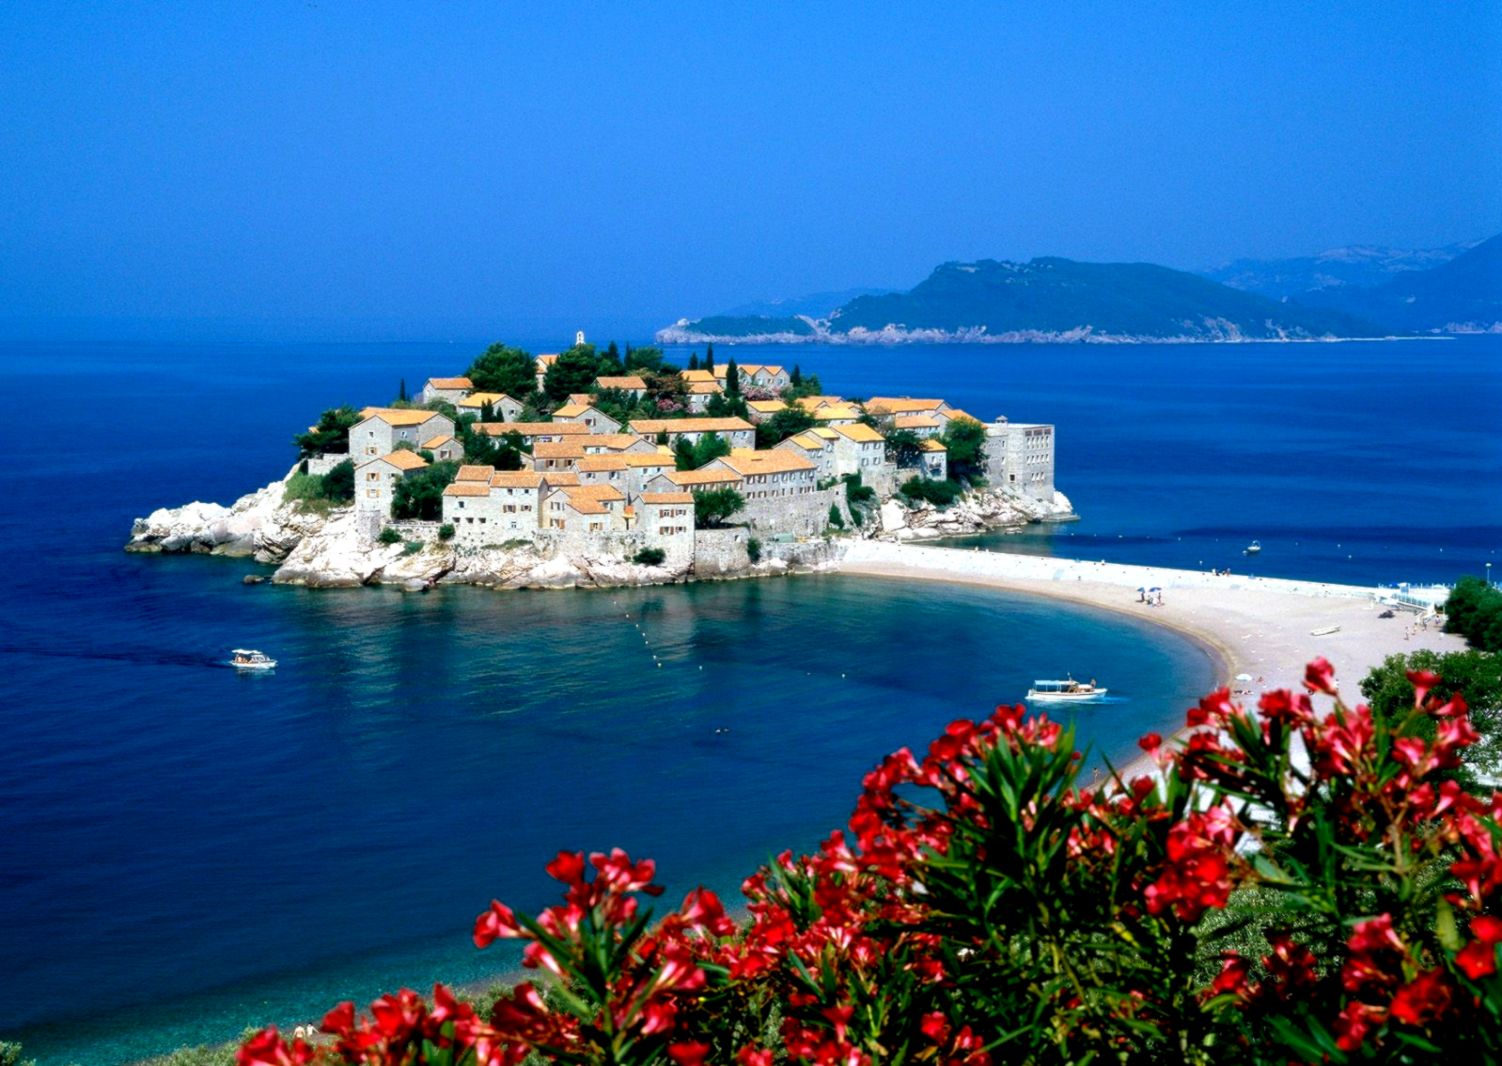 sveti-stefan-serbia-and-montenegro-wallpaper-and-background-image.jpg